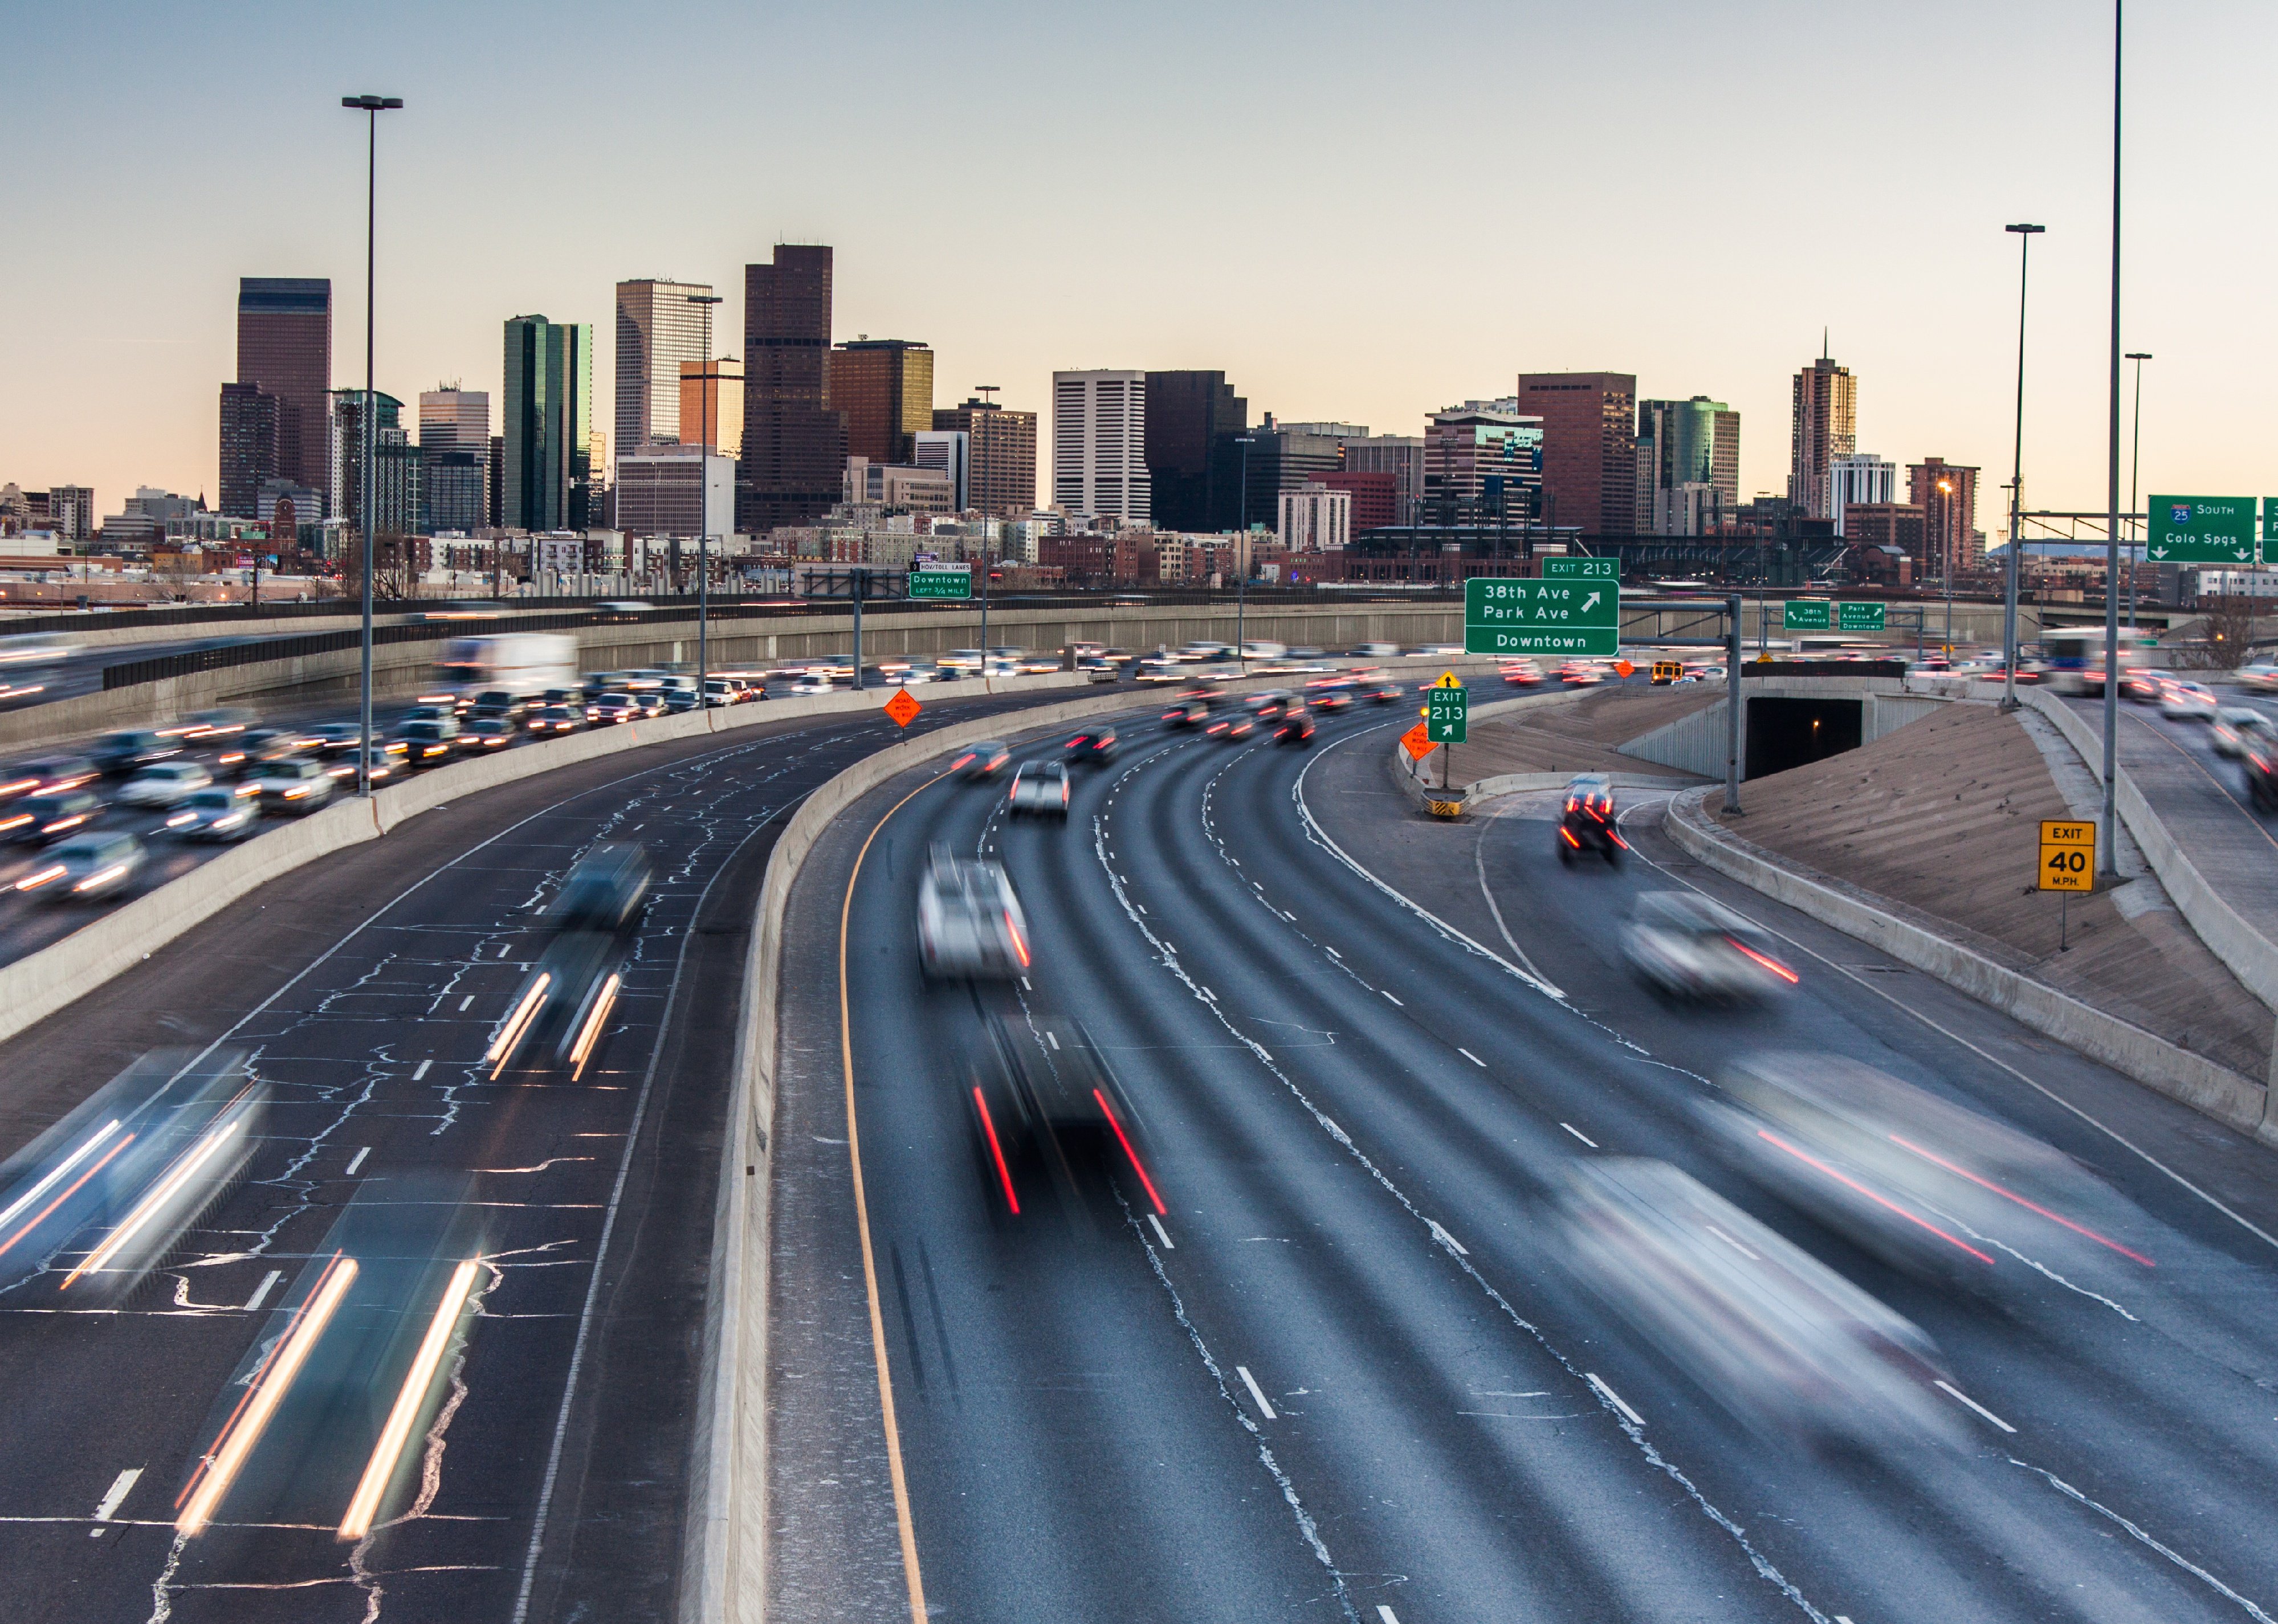 Rush hour traffic on I-25 looking toward downtown Denver.